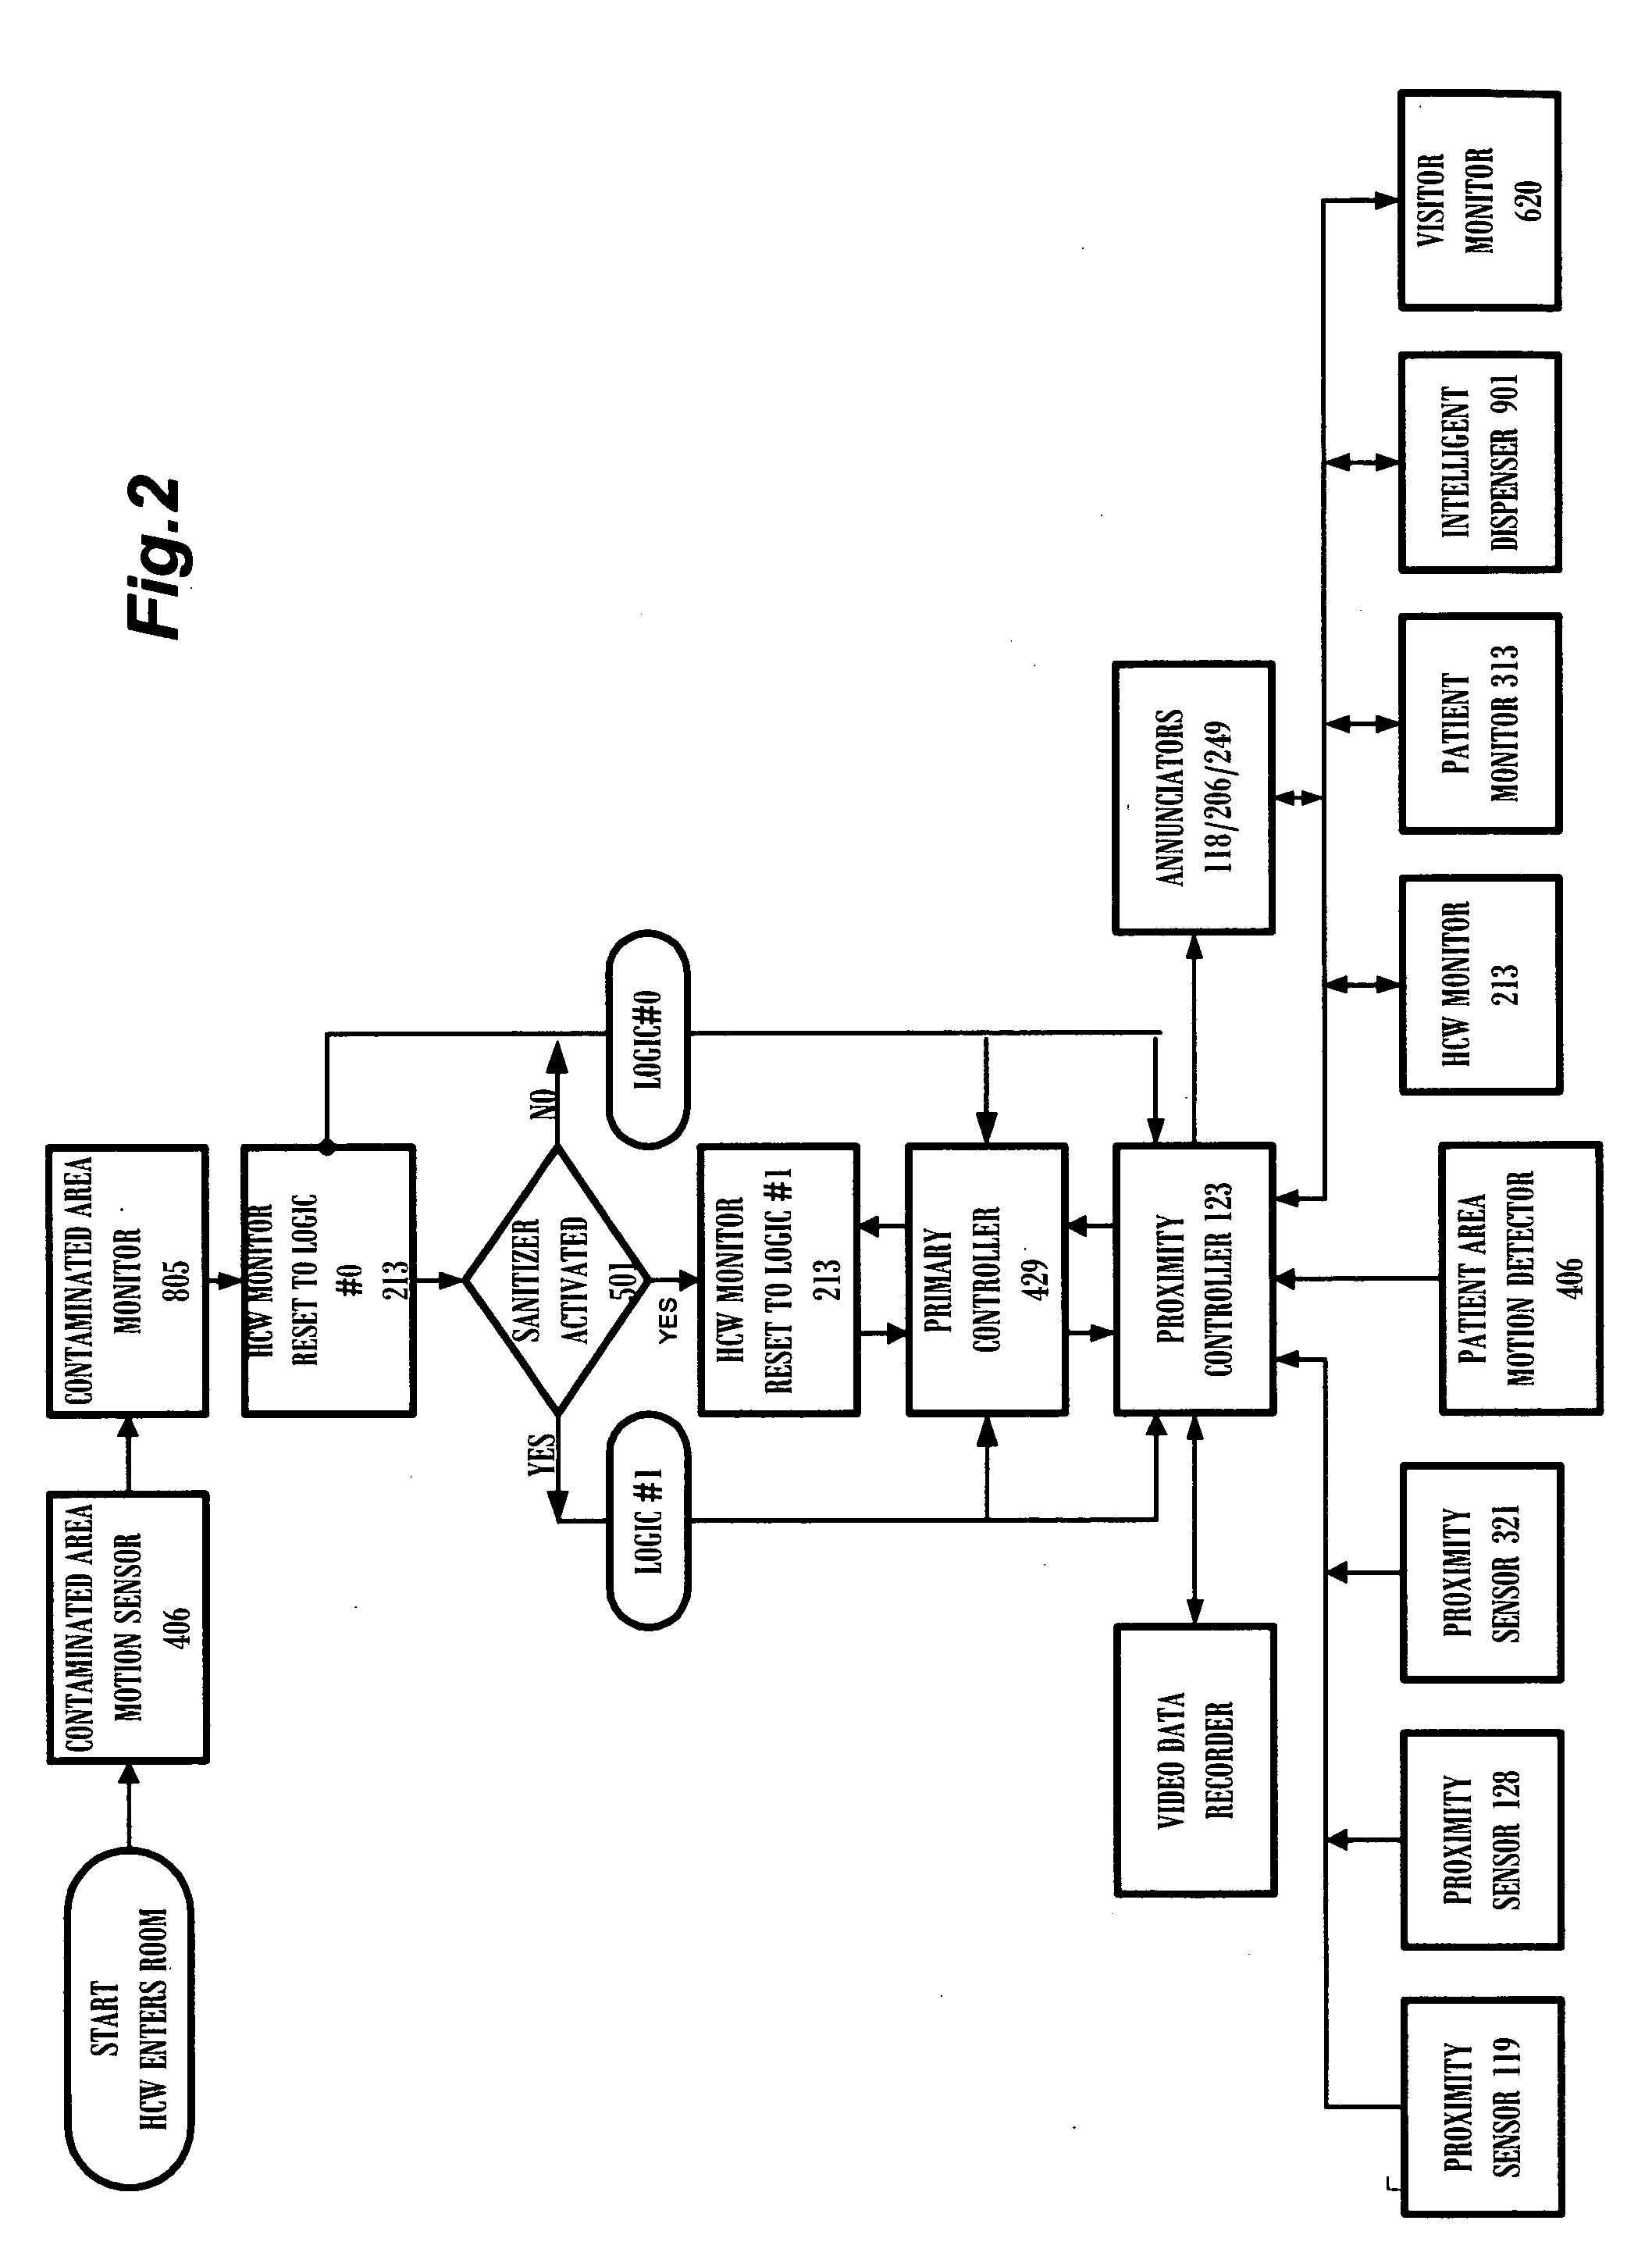 Systems and methods for monitoring health care workers and patients